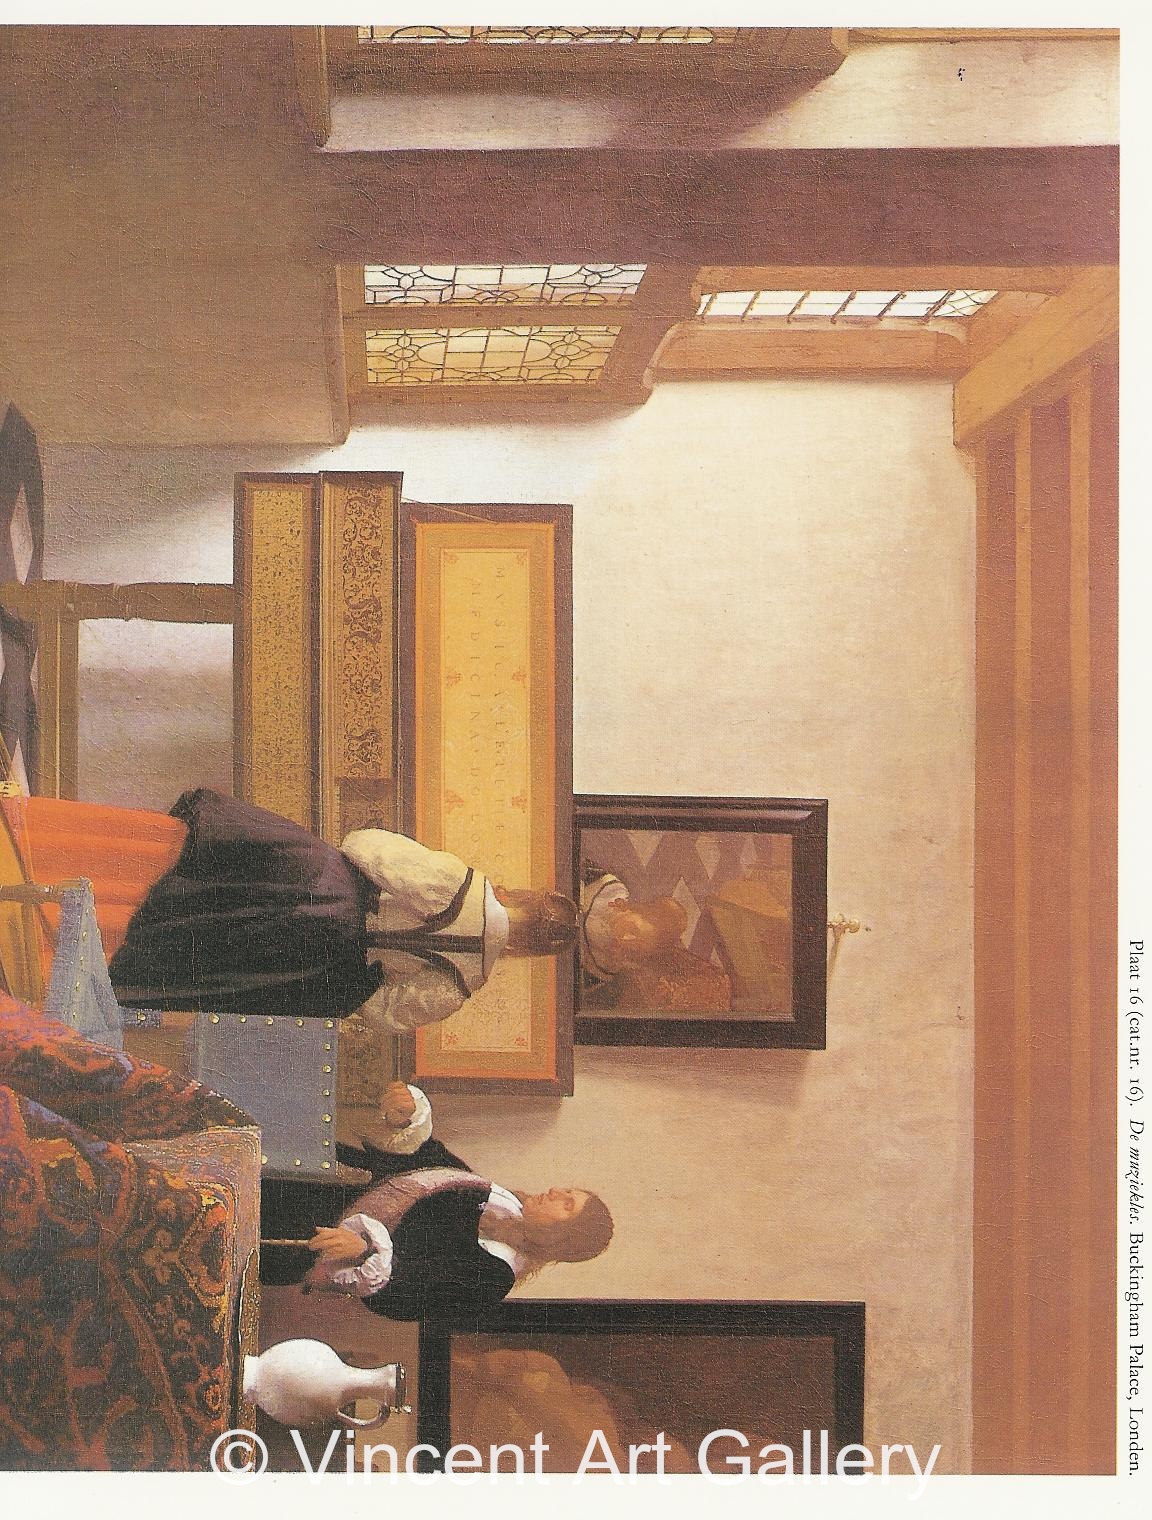 A120, VERMEER, The Music Lesson (upper part)